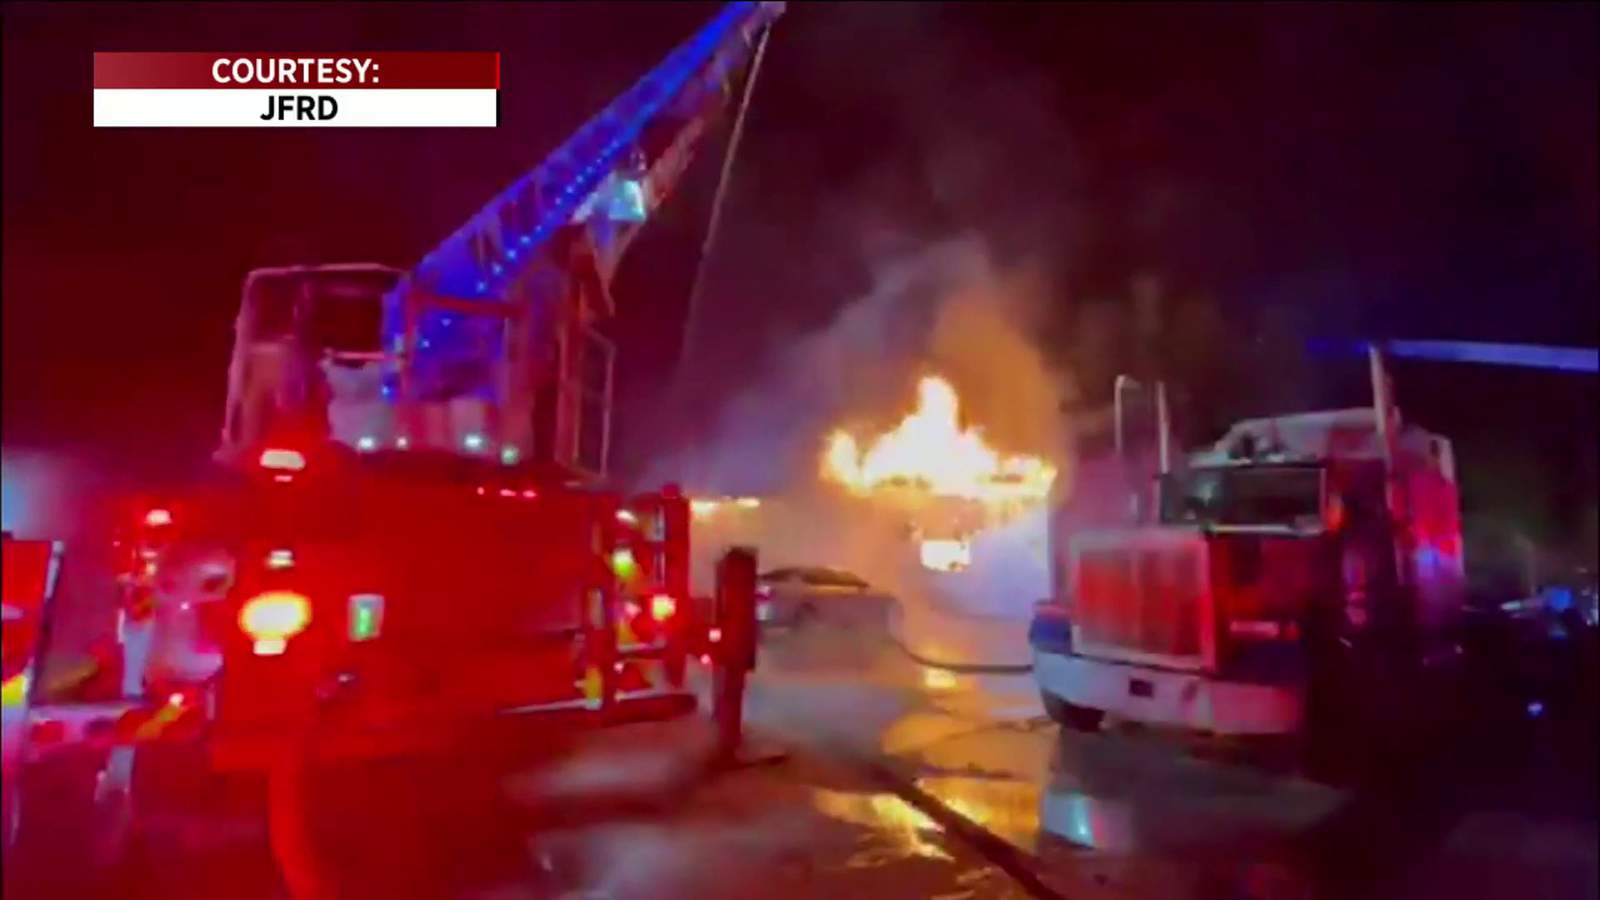 80 firefighters worked massive fire at Jacksonville trucking company